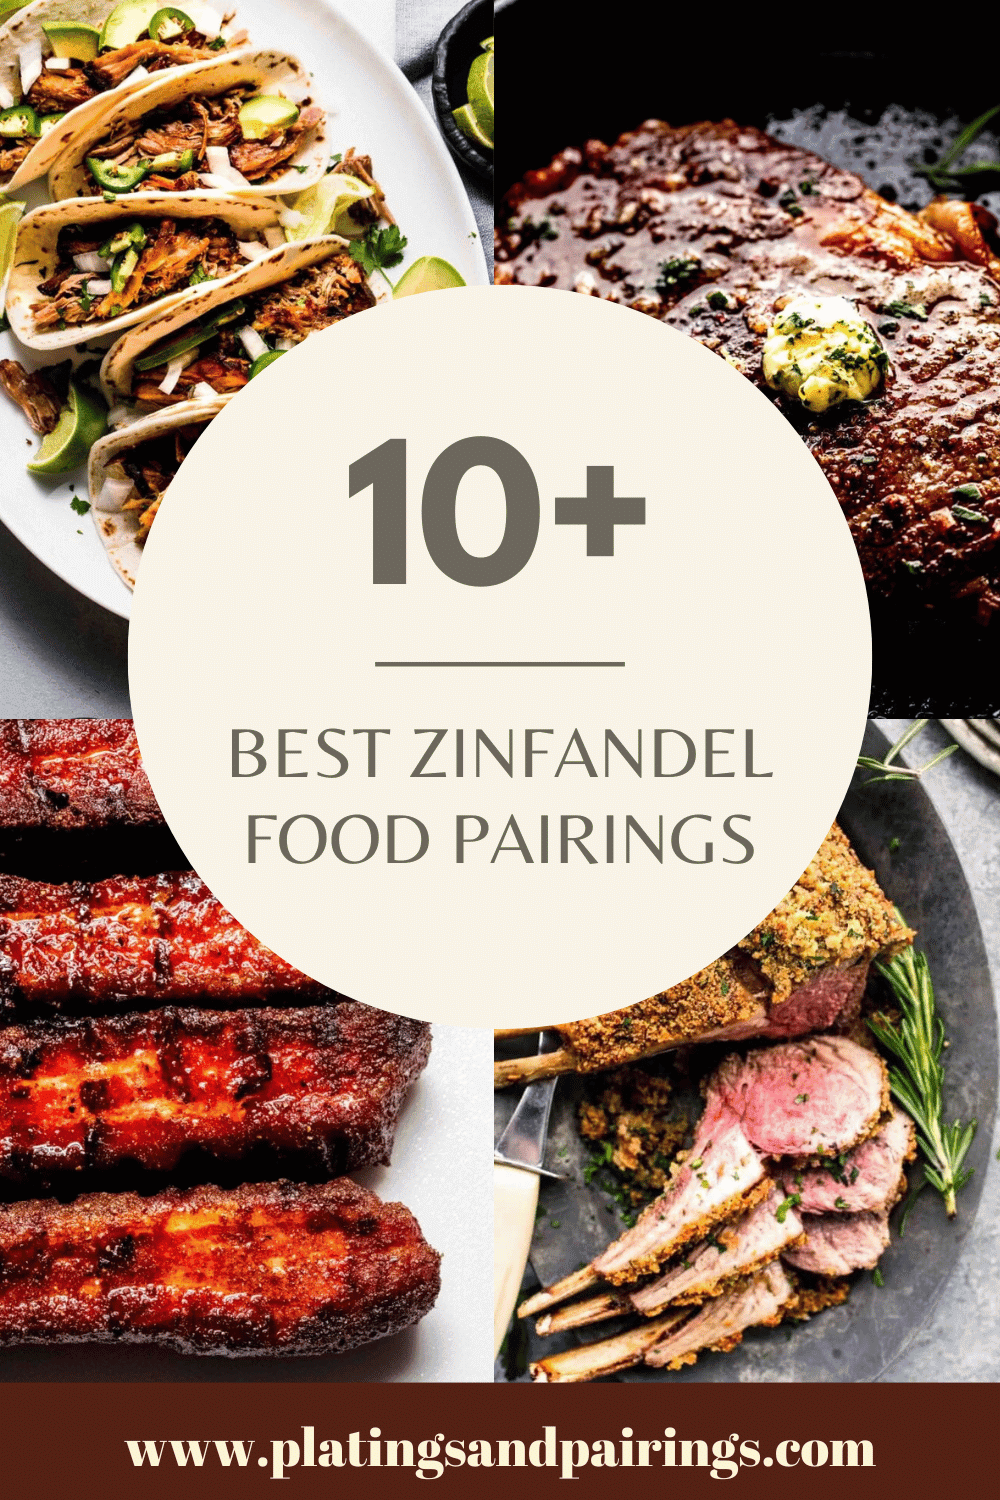 Collage of Zinfandel food pairings with text overlay.